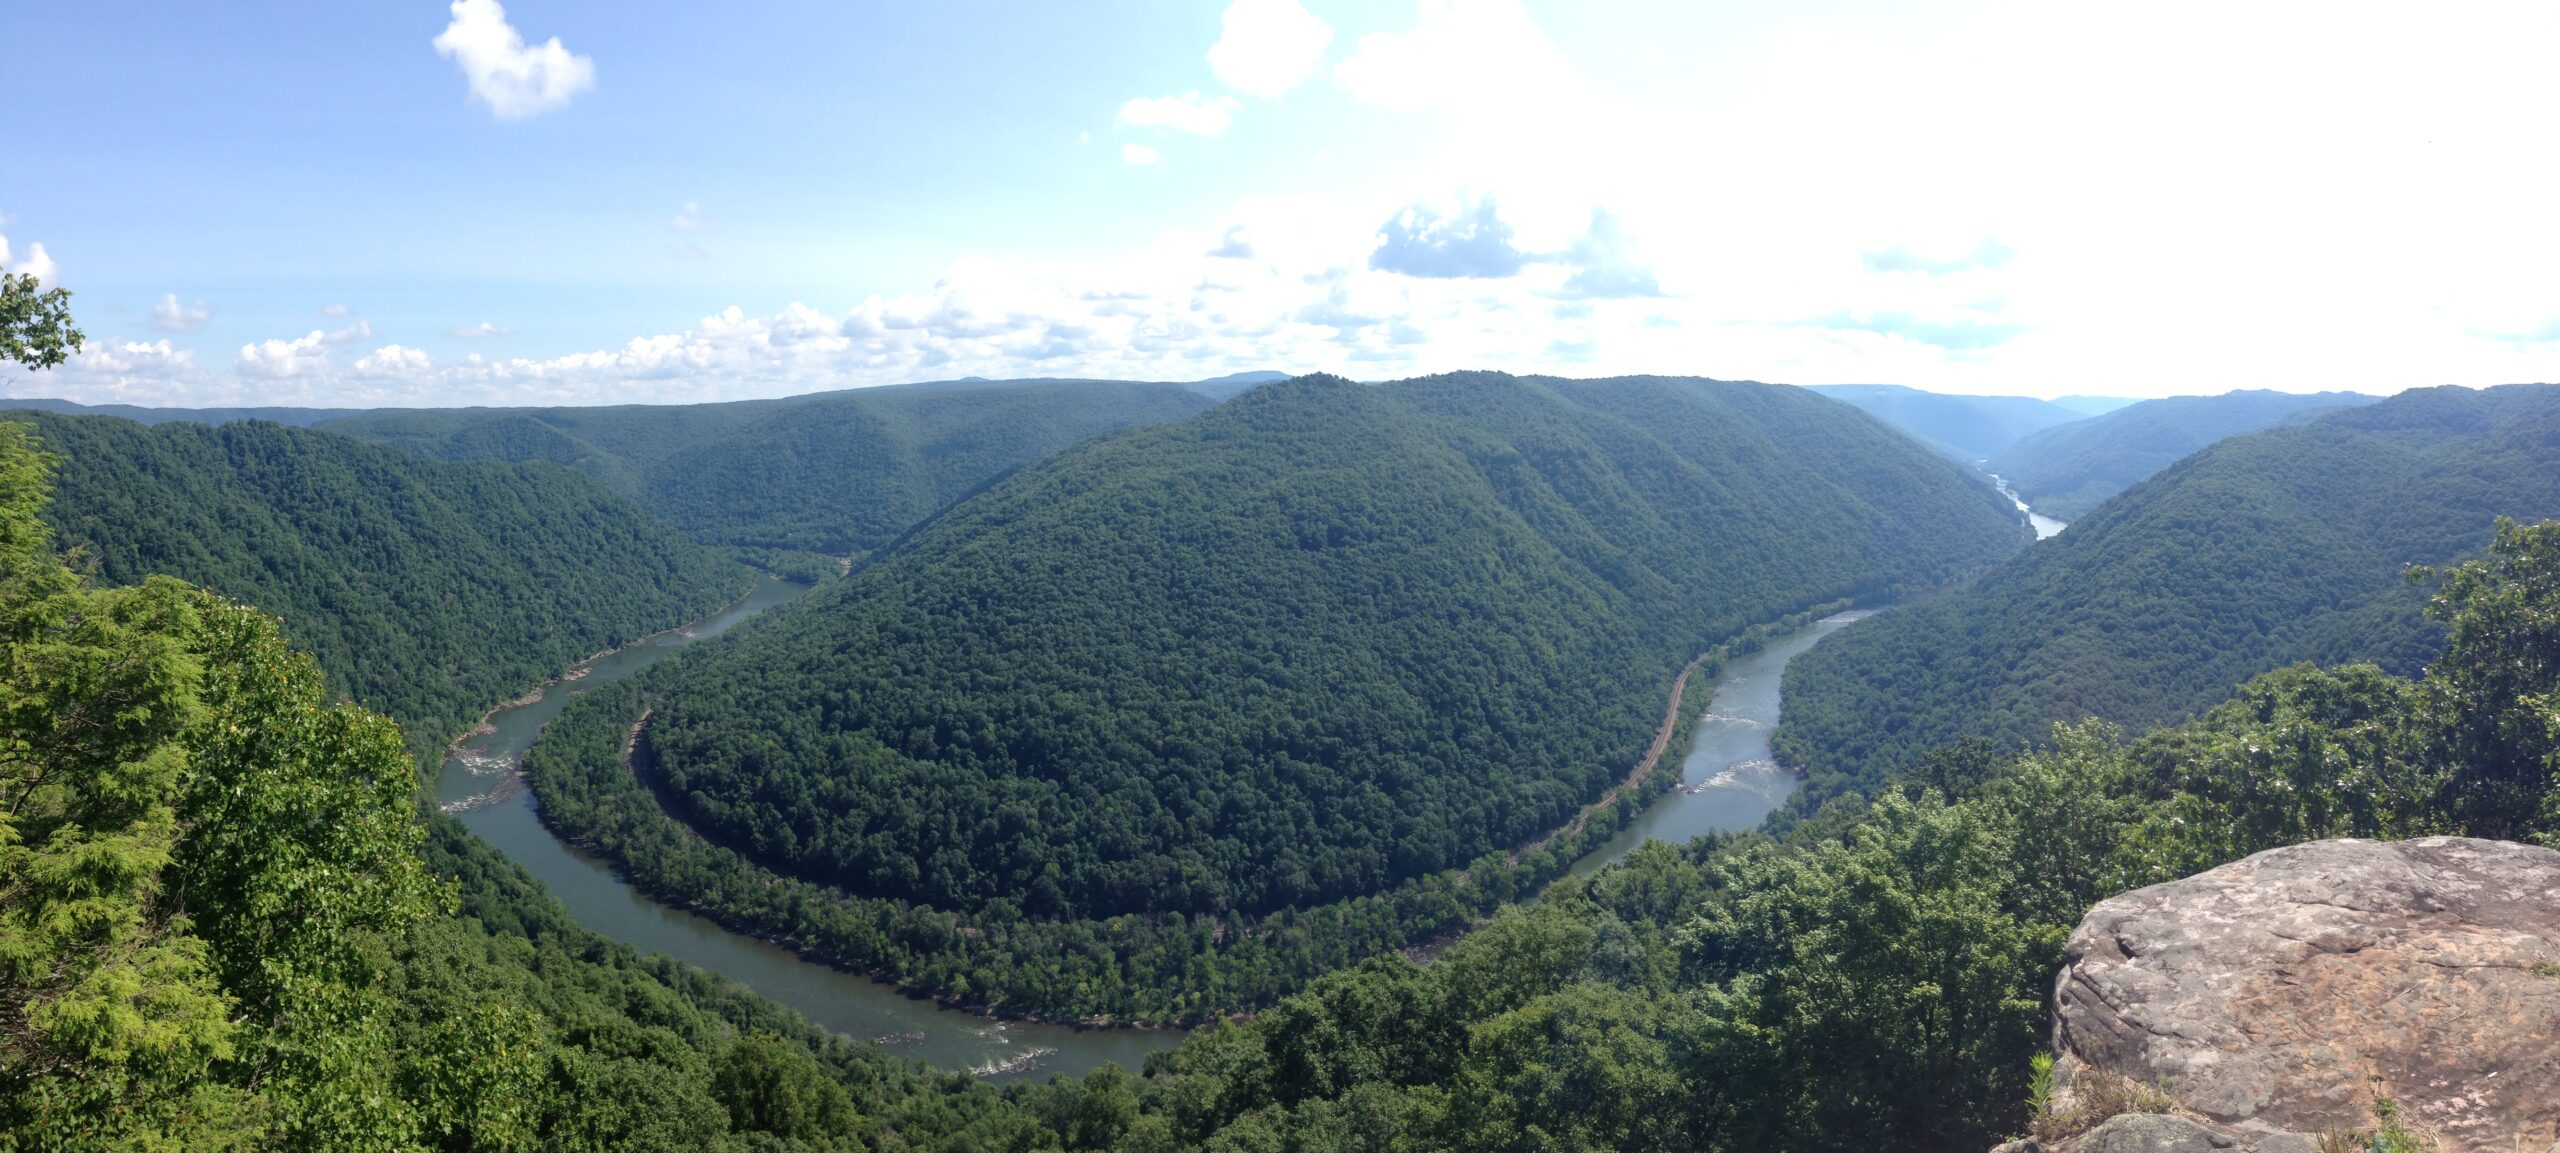 New River Gorge National Park Scaled